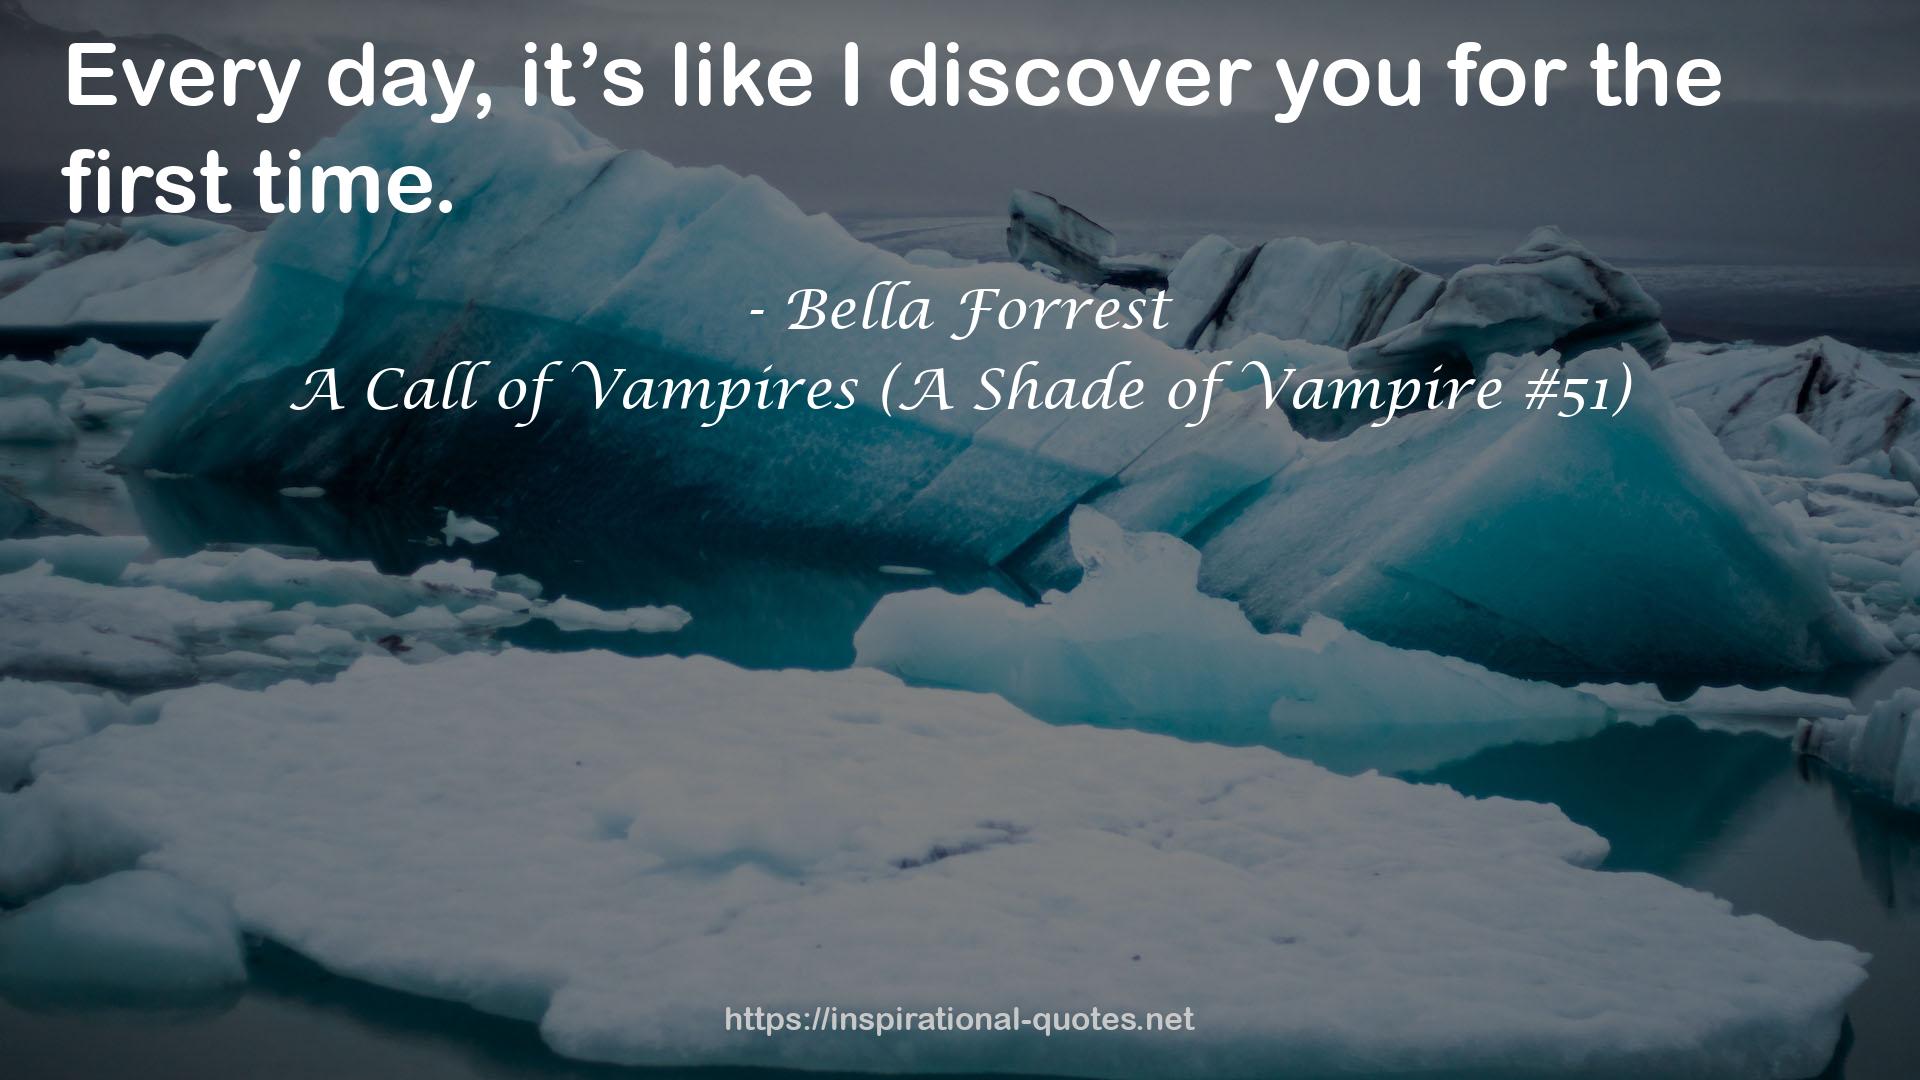 A Call of Vampires (A Shade of Vampire #51) QUOTES